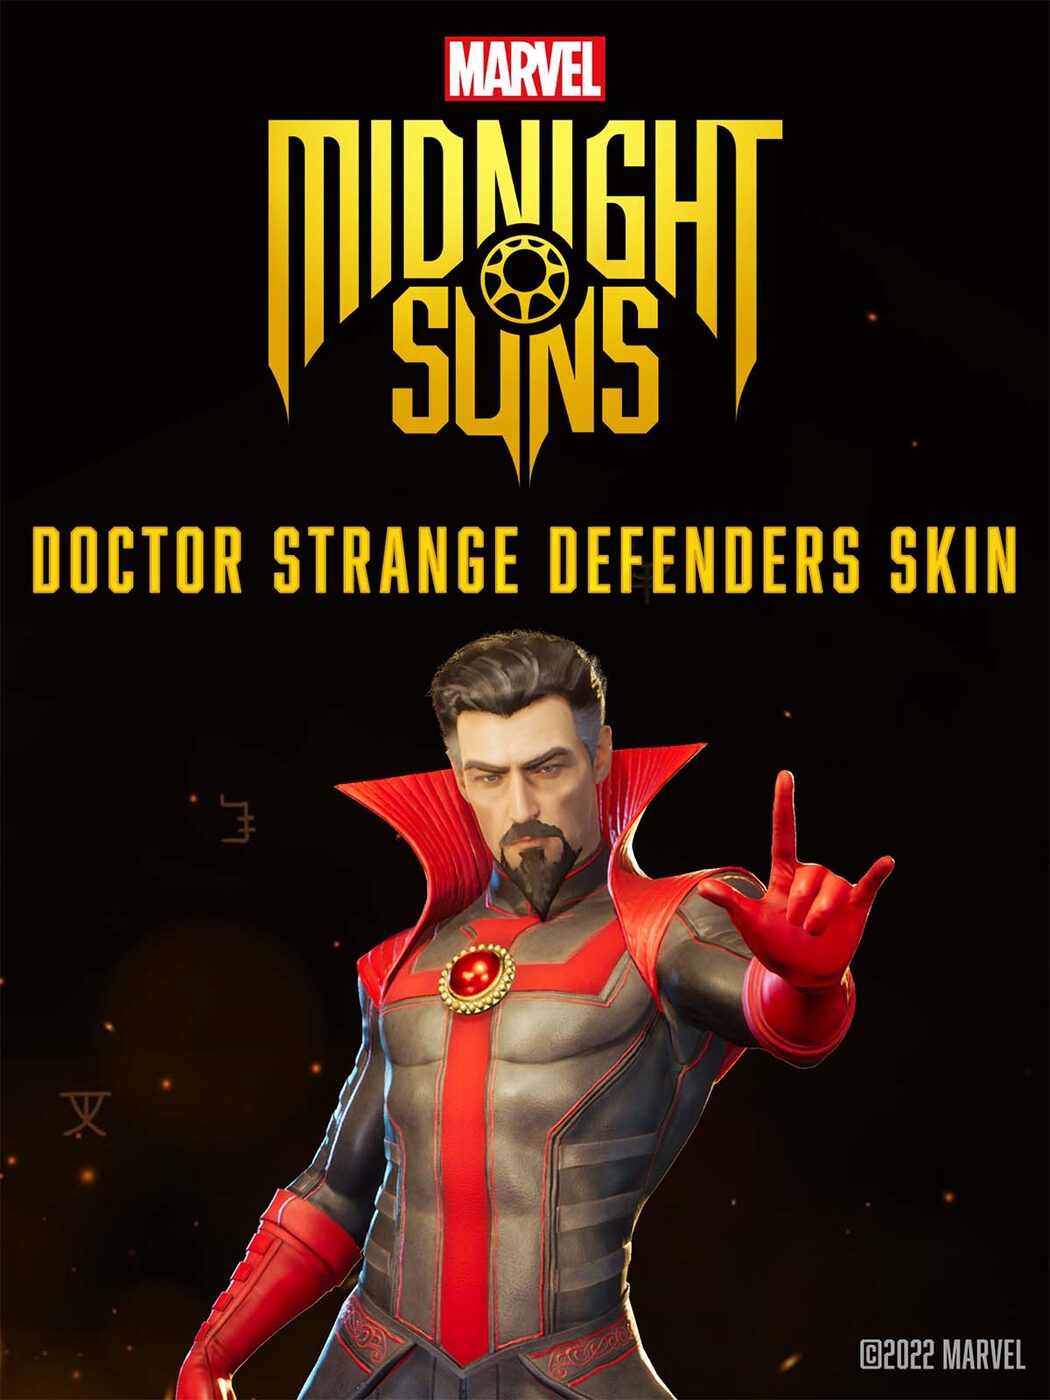 Marvel's Midnight Suns Digital+ Edition  Download and Buy Today - Epic  Games Store